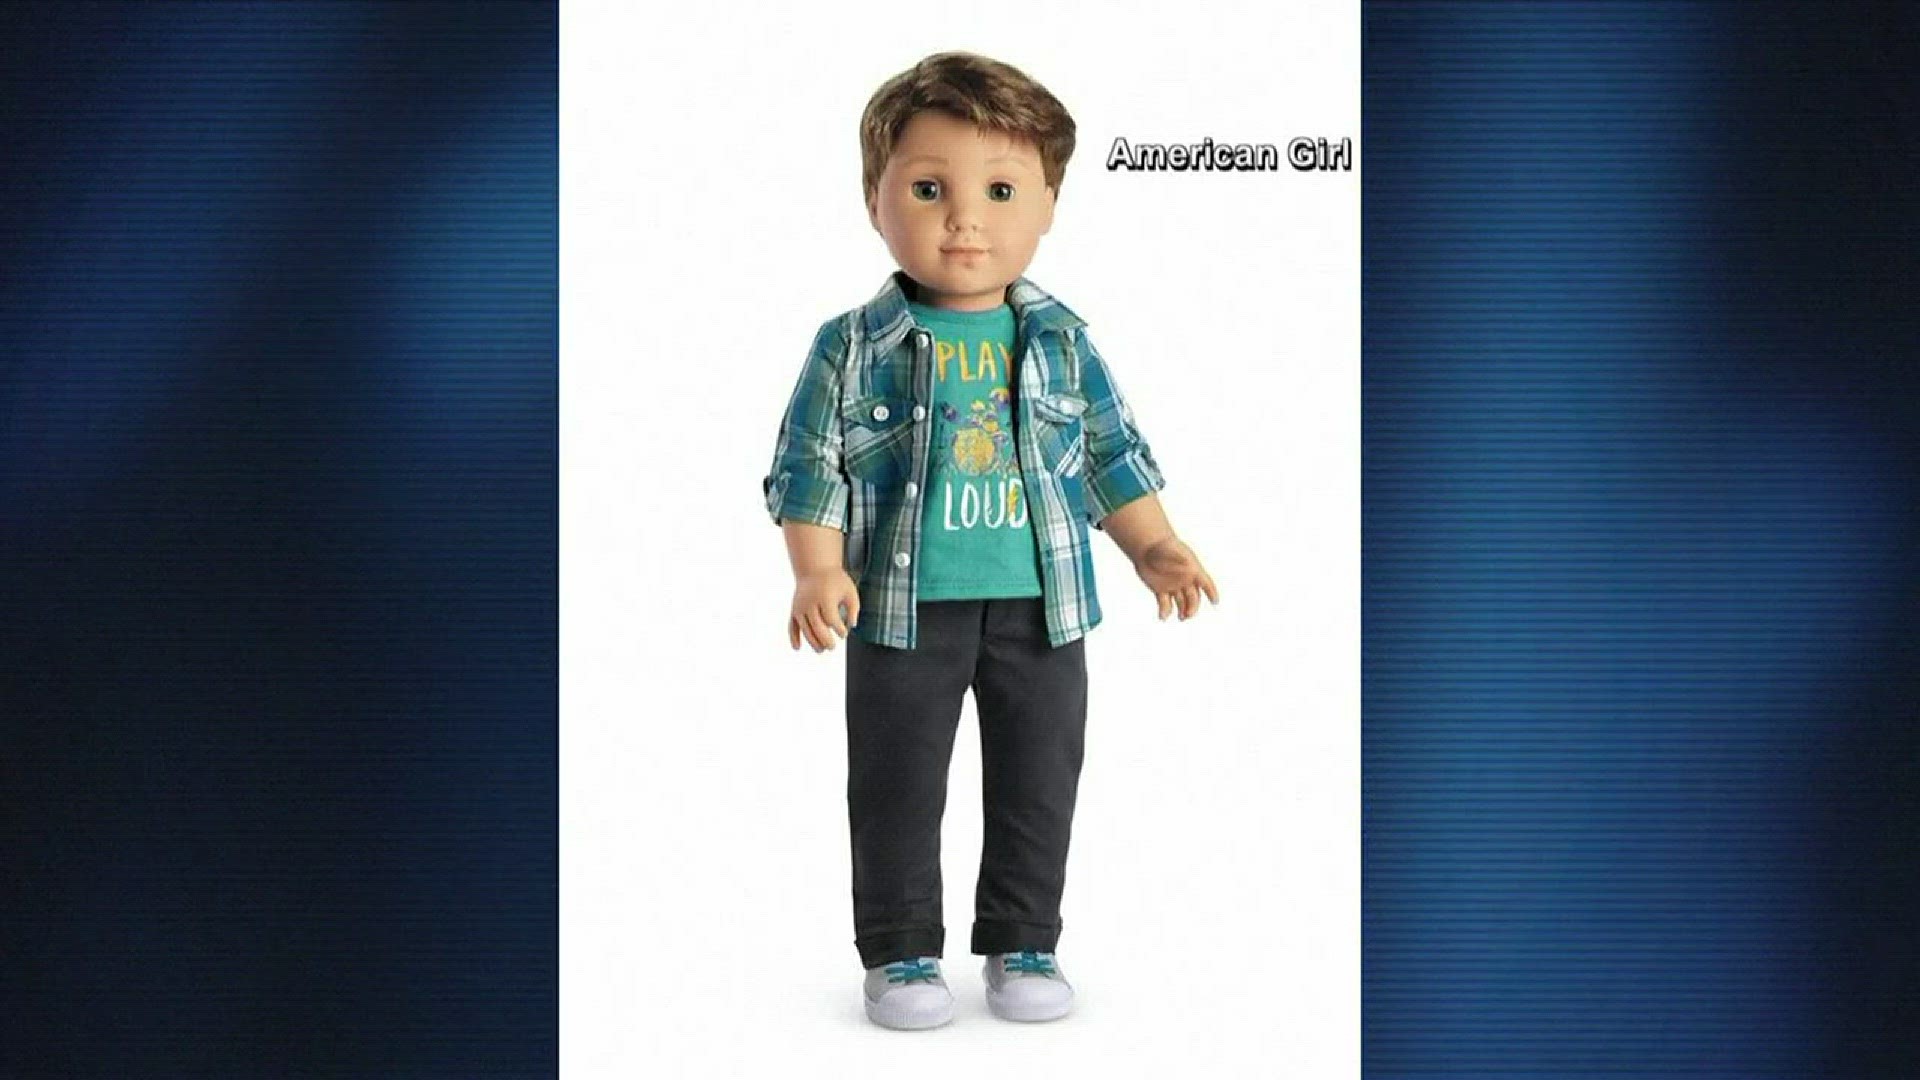 American Girl says it plans to launch a wide range of dolls this year, including its first boy doll.